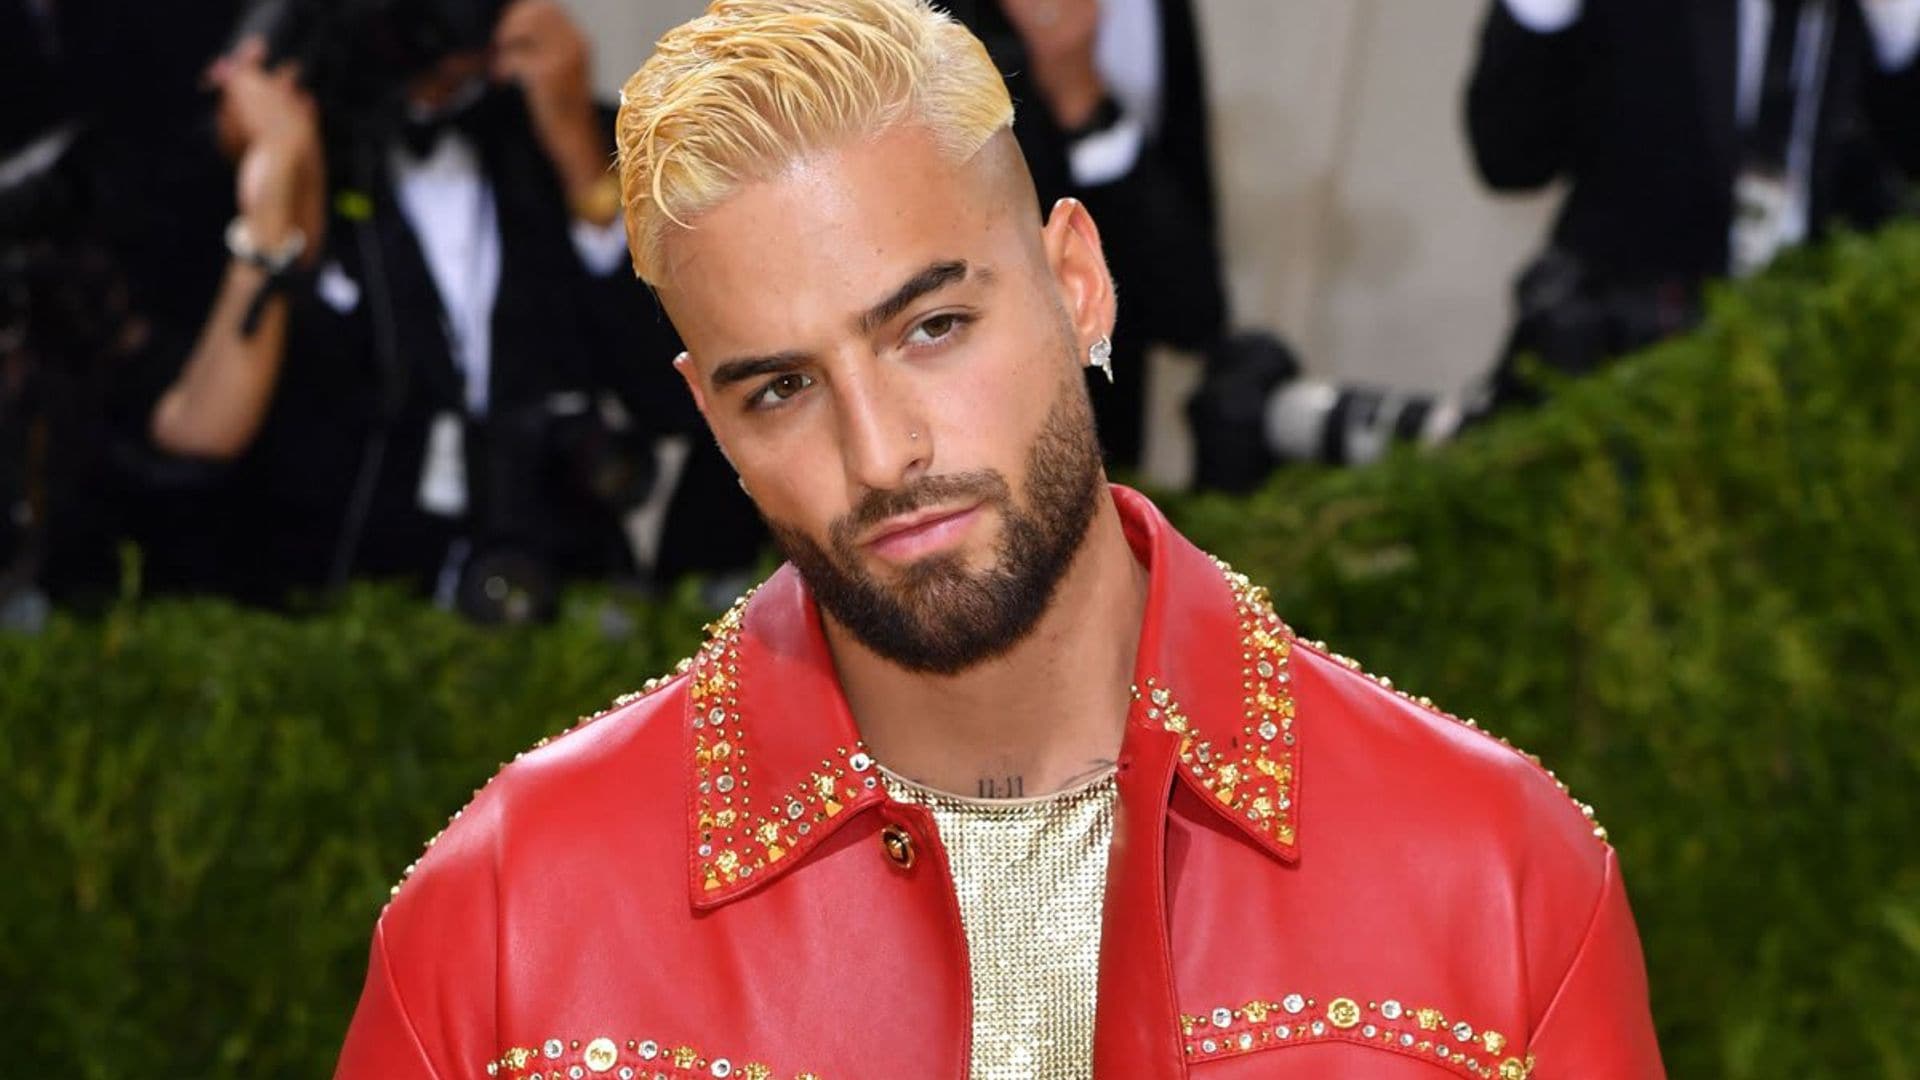 Maluma opens up about the special meaning behind his Met Gala look